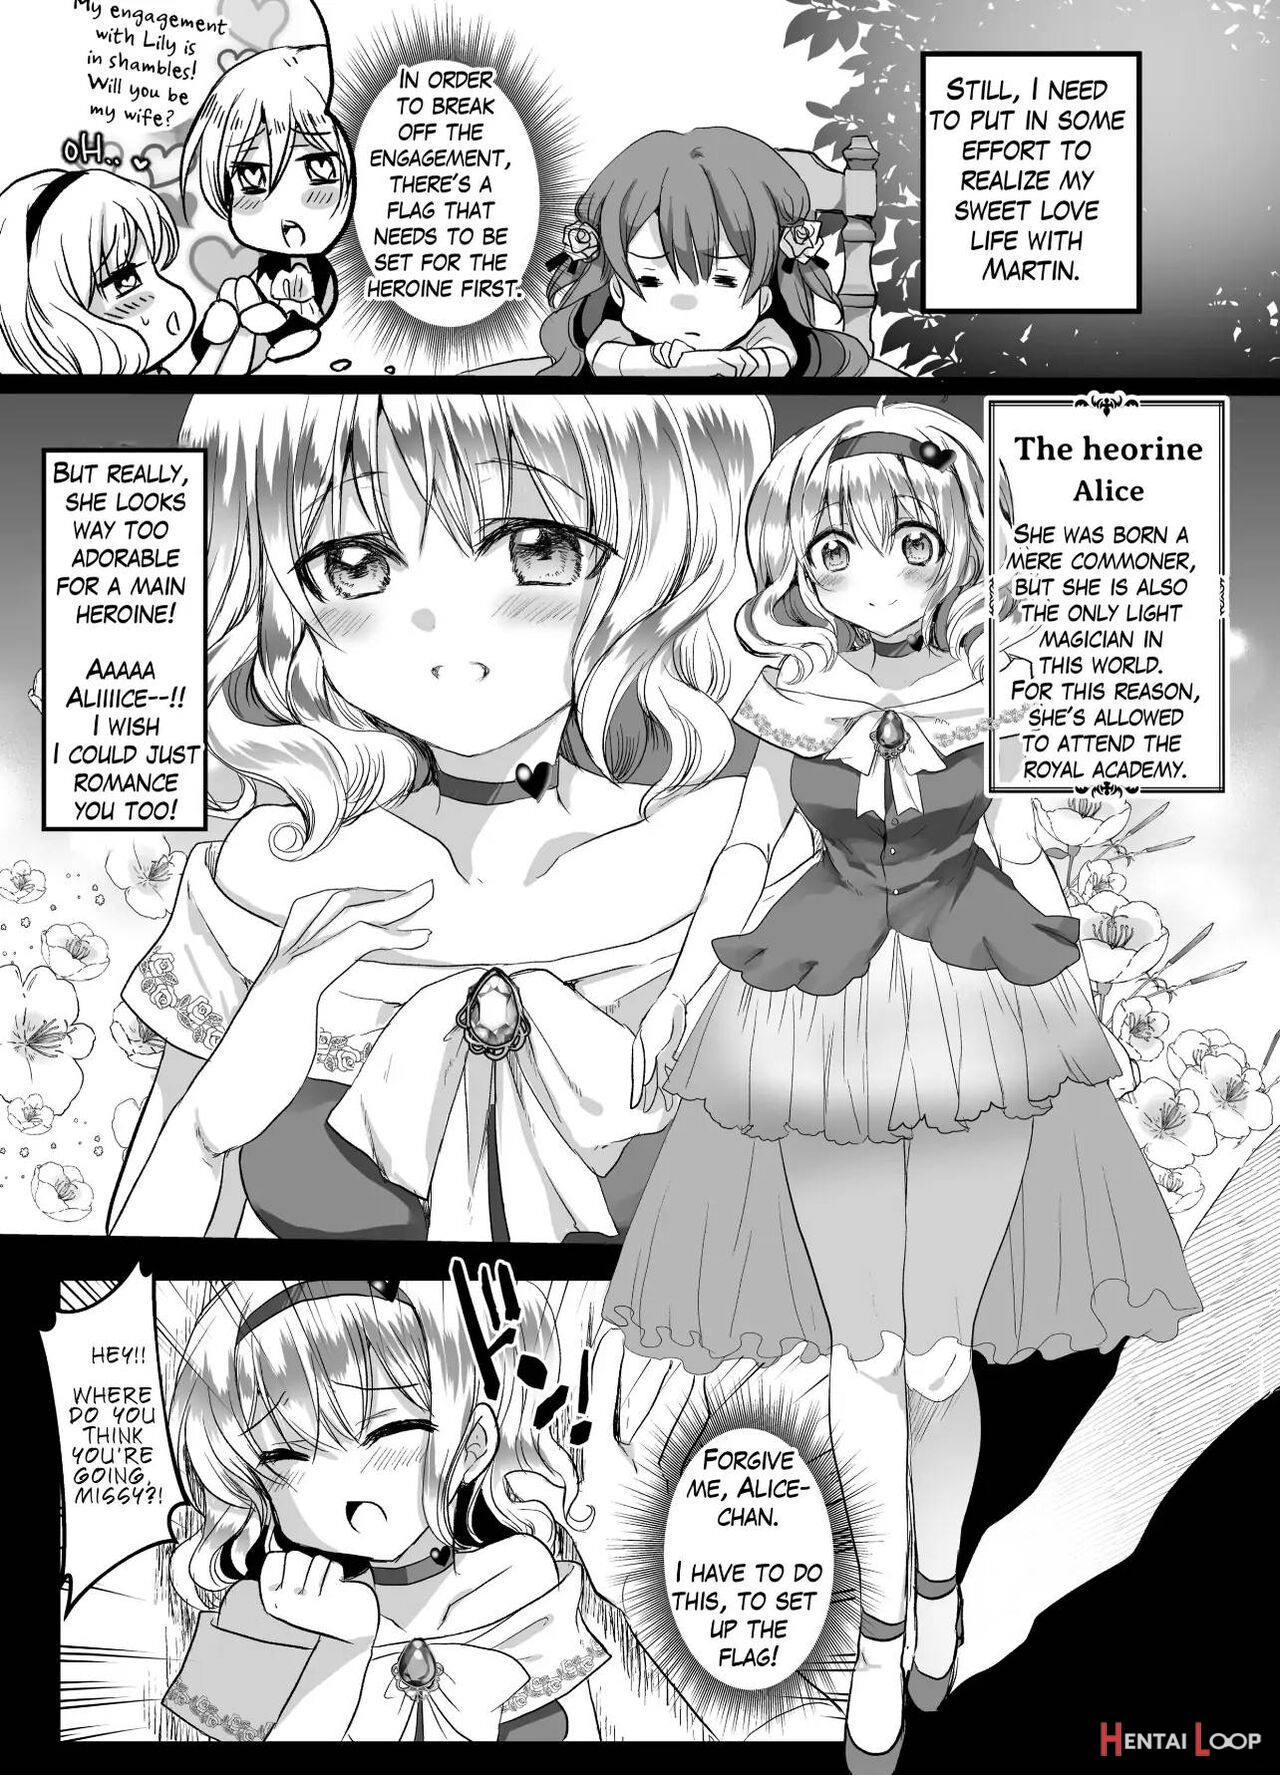  jk's Tragic Isekai Reincarnation As The Villainess ~but My Precious Side Character!~ page 11